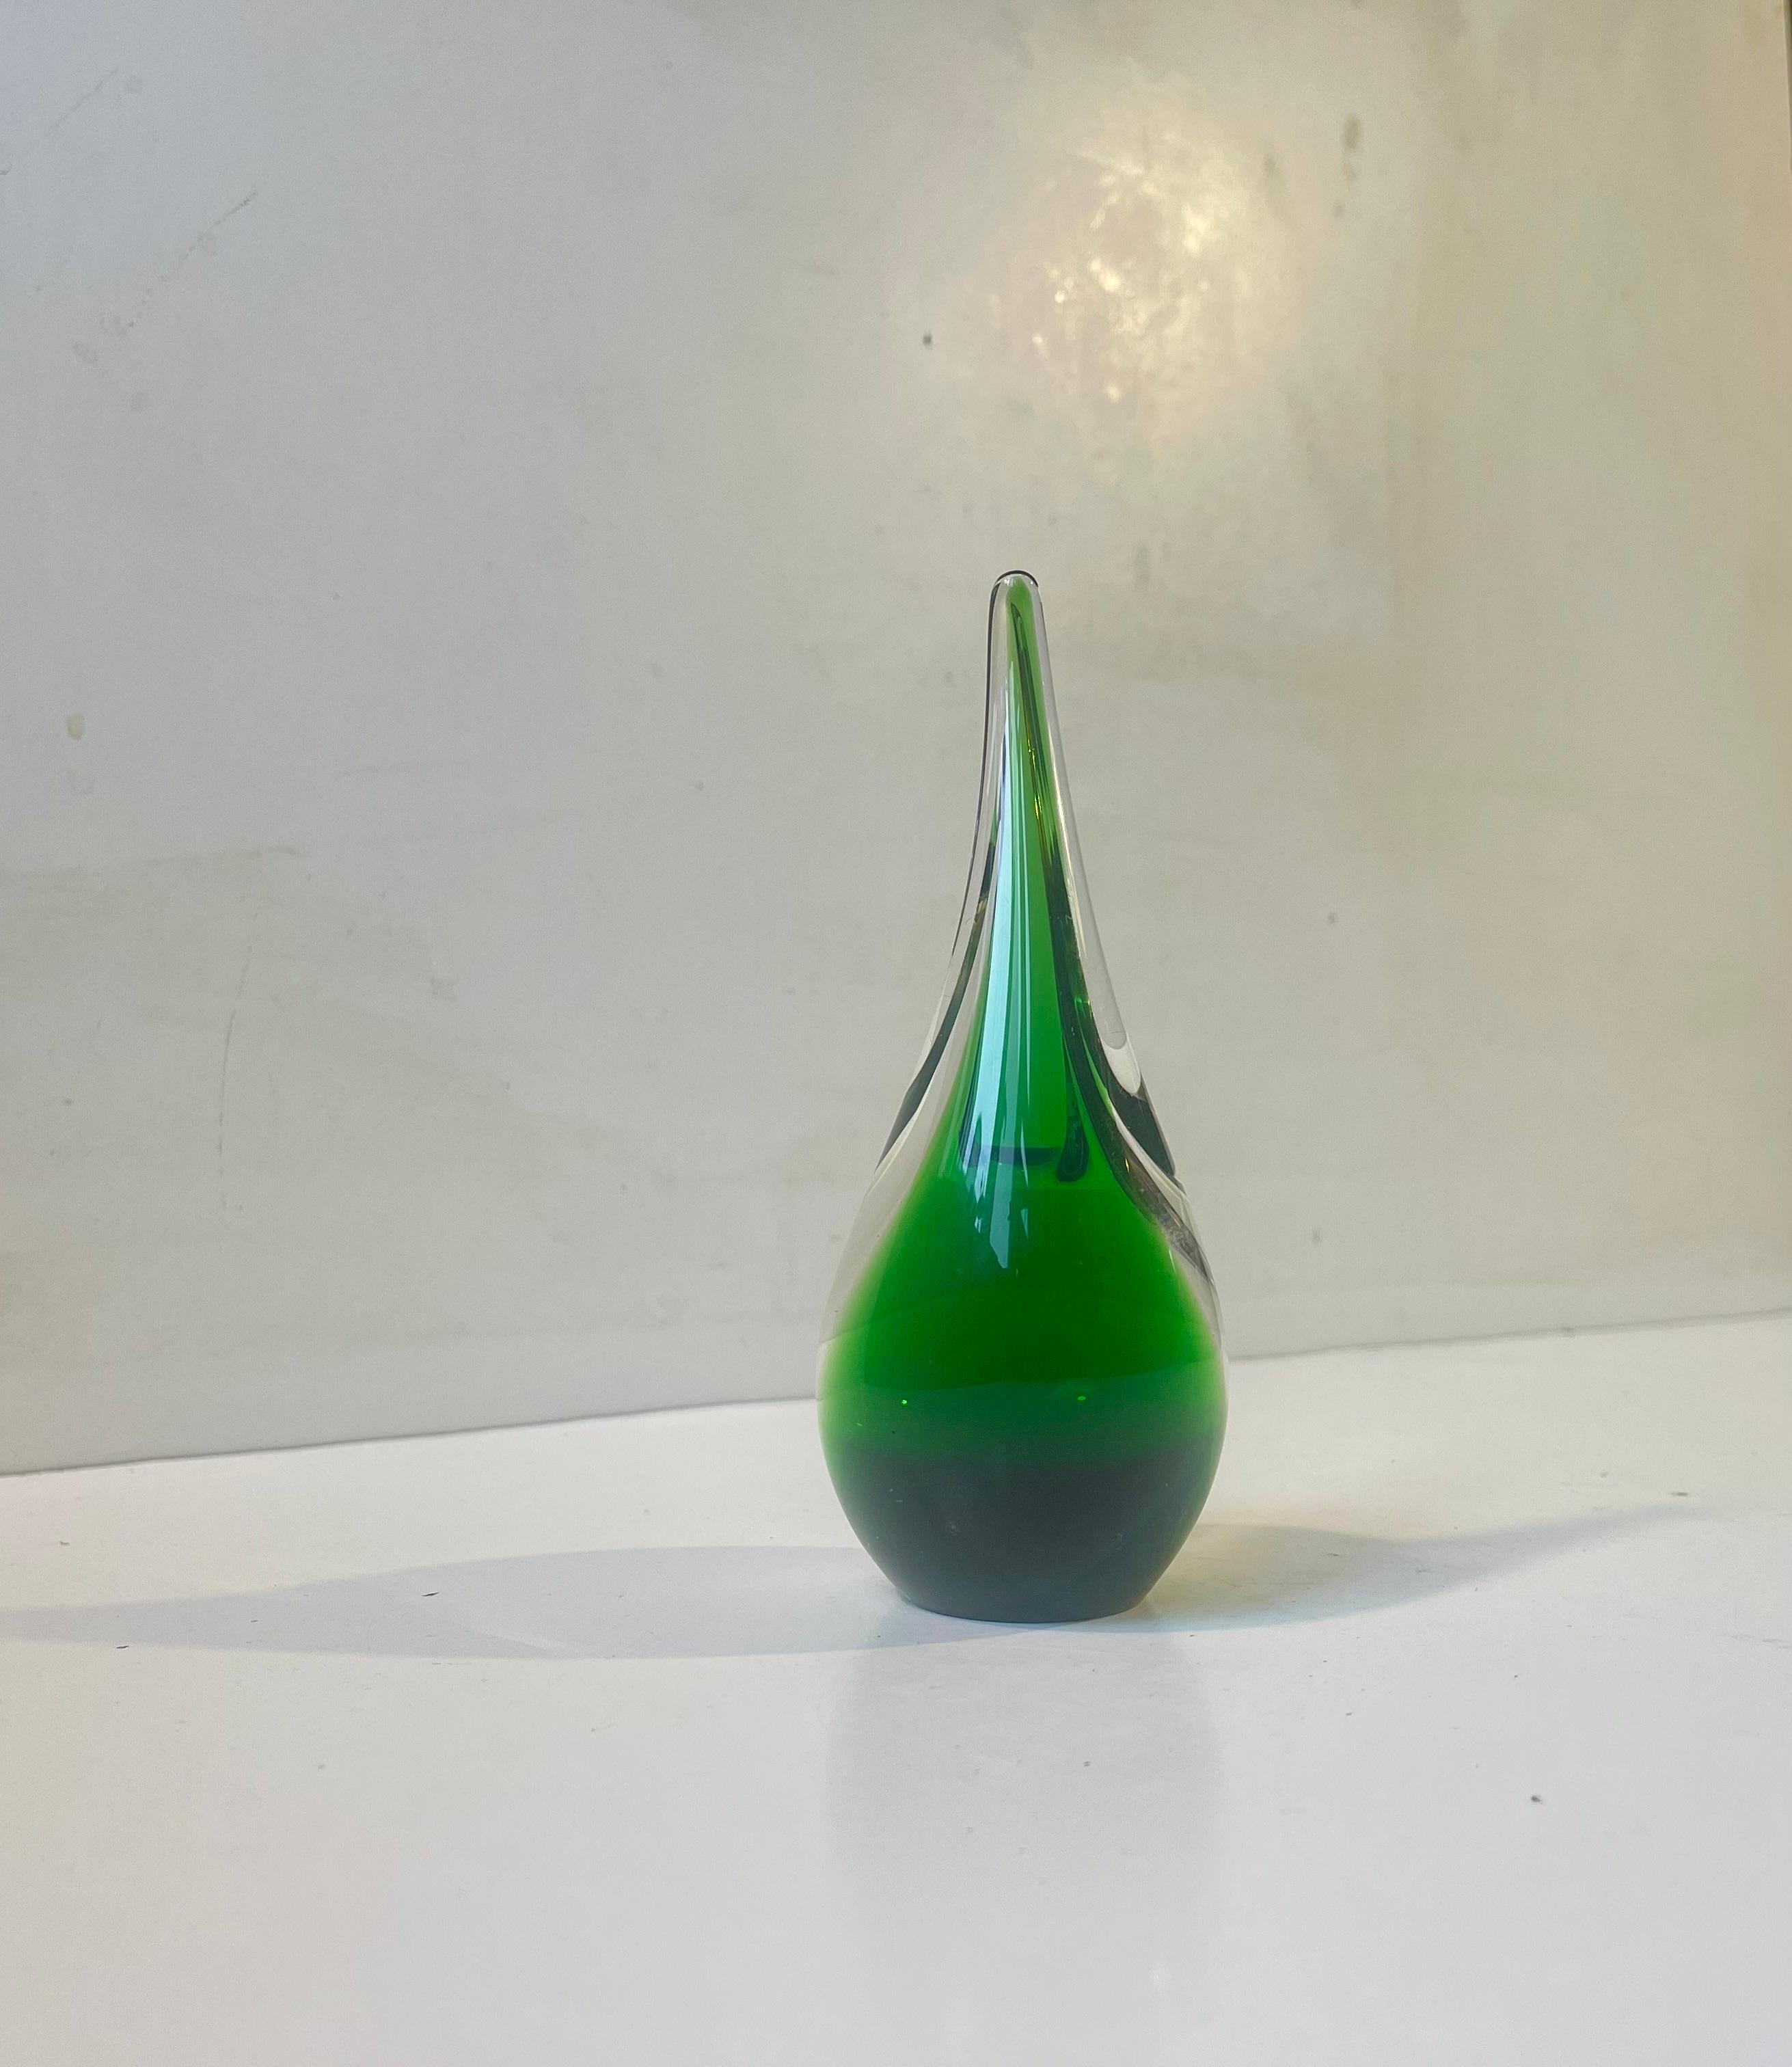 Unique art glass vase designed and made by Per Lütken at Holmegaard in Denmark in 1957. Executed in green and clean hand-blown Sommerso Glass. Hand-signed to its base Holmegaard, 1957, PLS (Per Lütken). Measurements: H: 14.5 cm, W/D: 8/8 cm.

Free